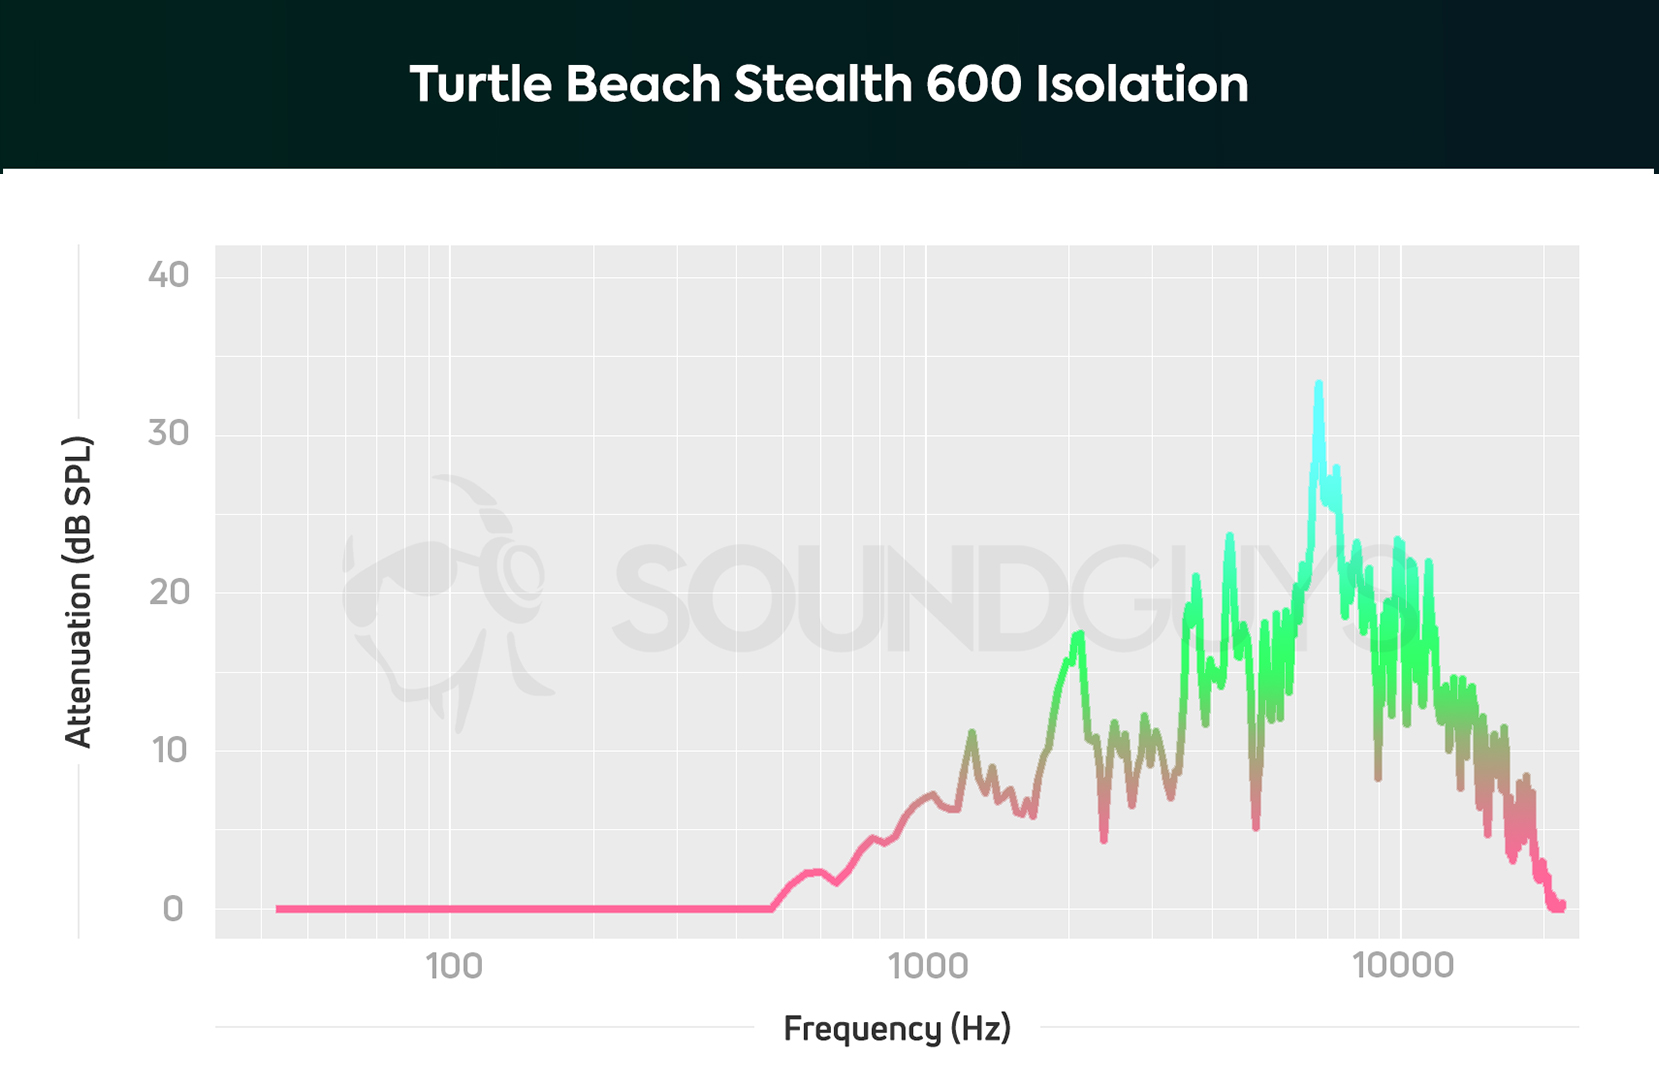 The Turtle Beach Stealth 600 Gen 2 gaming headset isolation chart shows that plenty of noise gets through the headset.